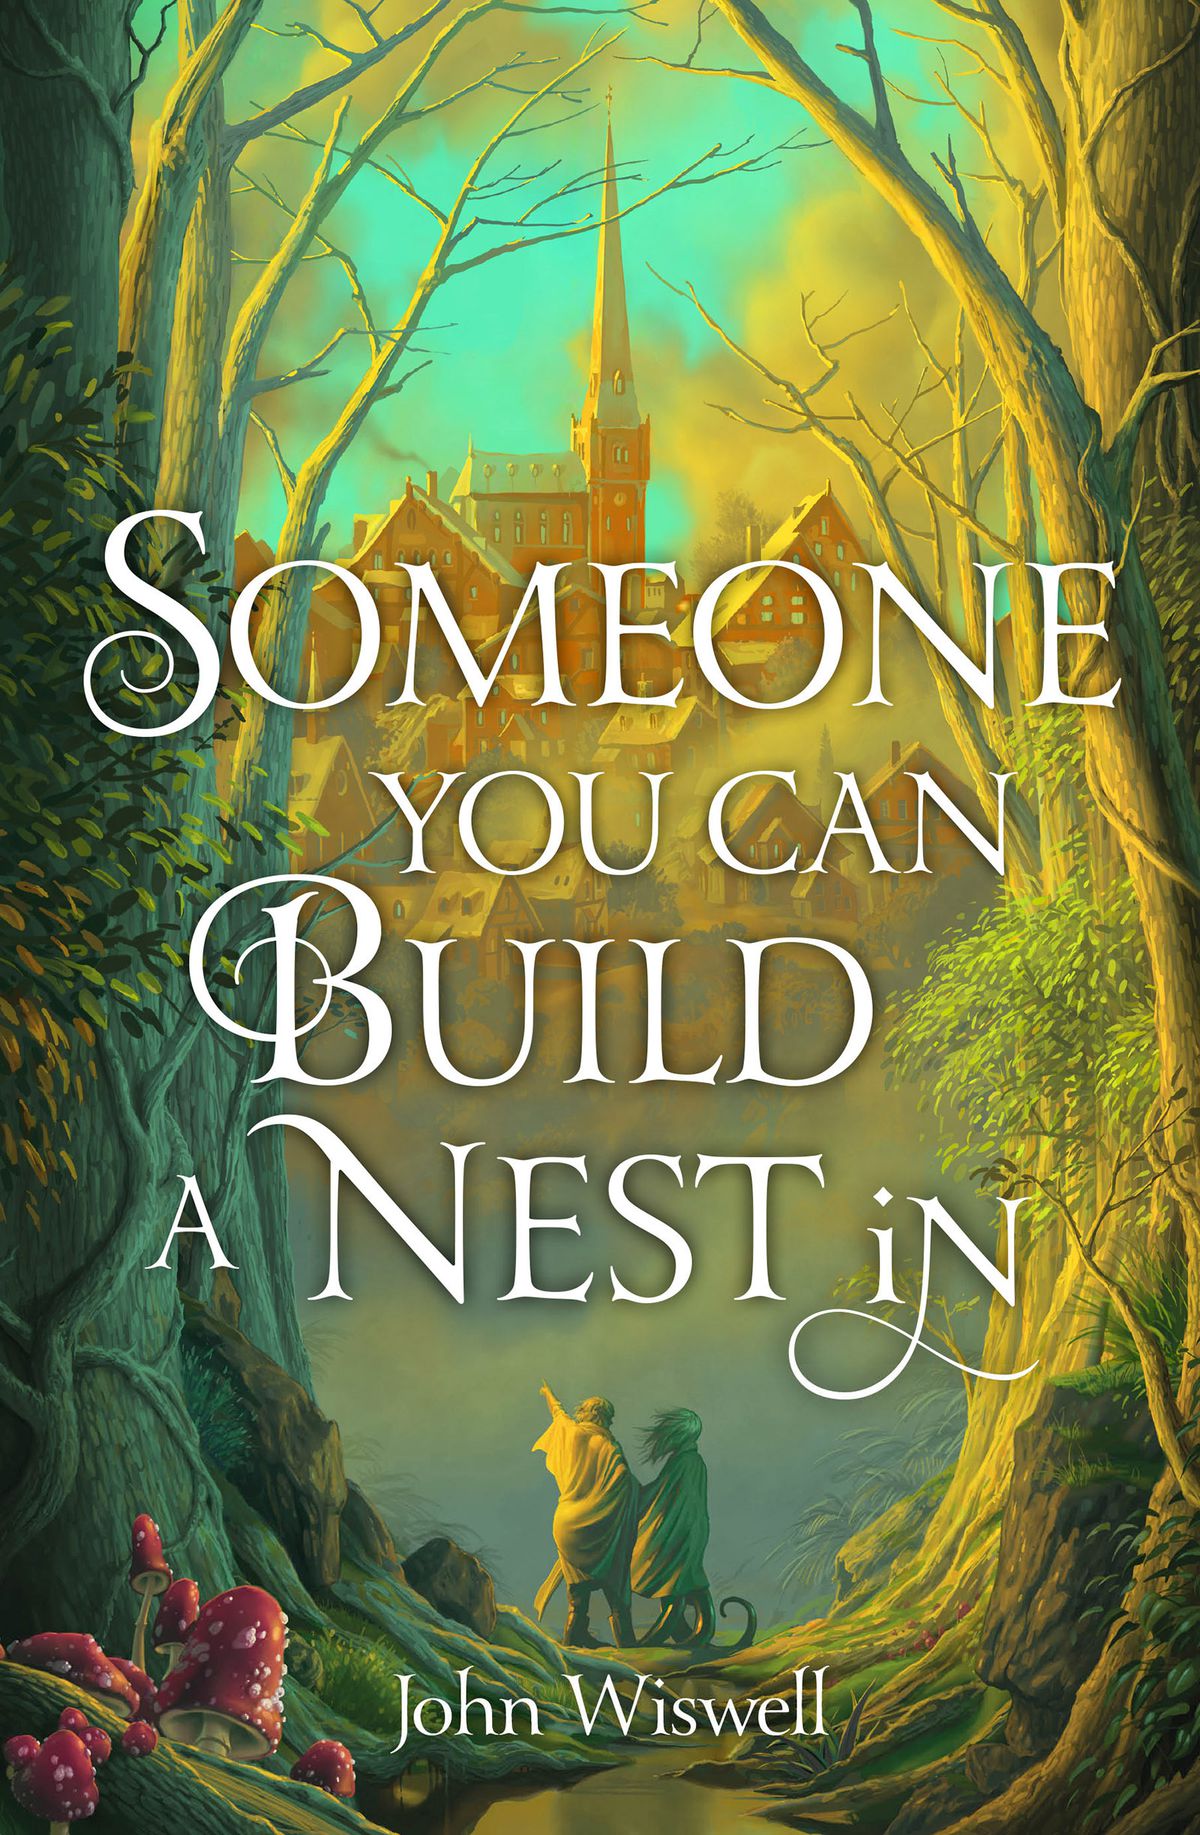 The UK cover of John Wiswell’s novel Someone You Can Build A Nest In, showing two robed figures standing together in a green forest, pointing upward at the spires of a distant village above them